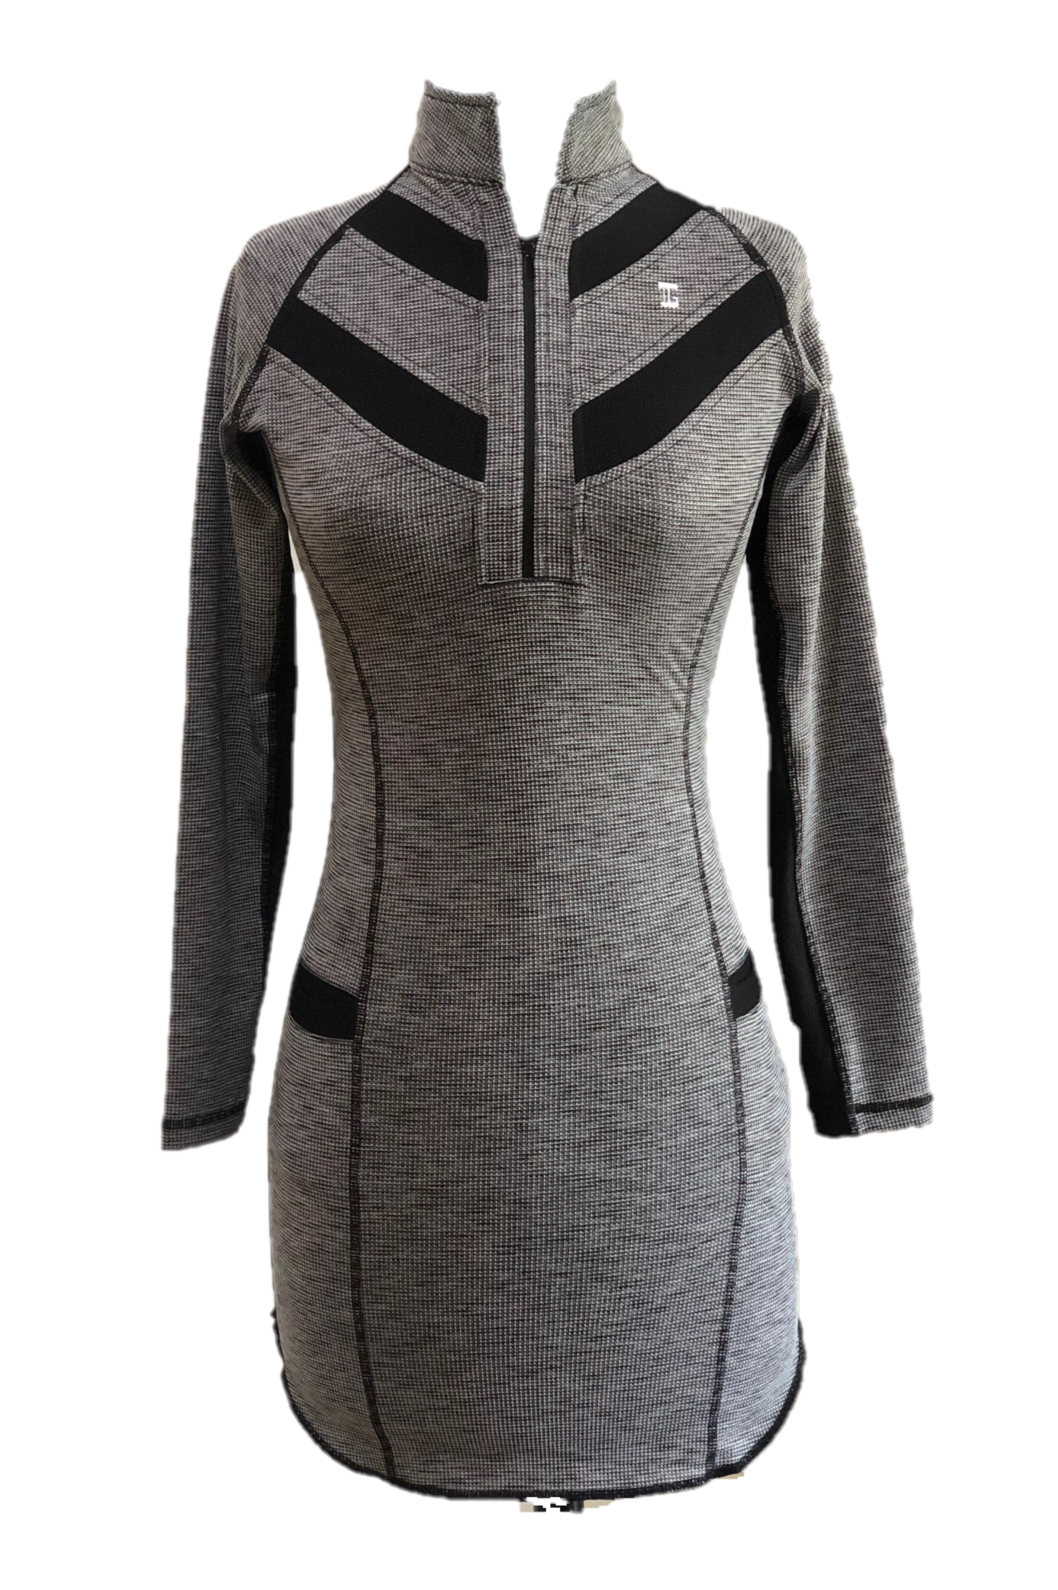 GD-018 || Golf Dress Long Sleeved Charcoal And White Textured Fabric, Wide Back Chevron Stripes 2 Each Side Of Front Collar, Zip Mock Polo Neck, 2 Front Pockets With Black Trim